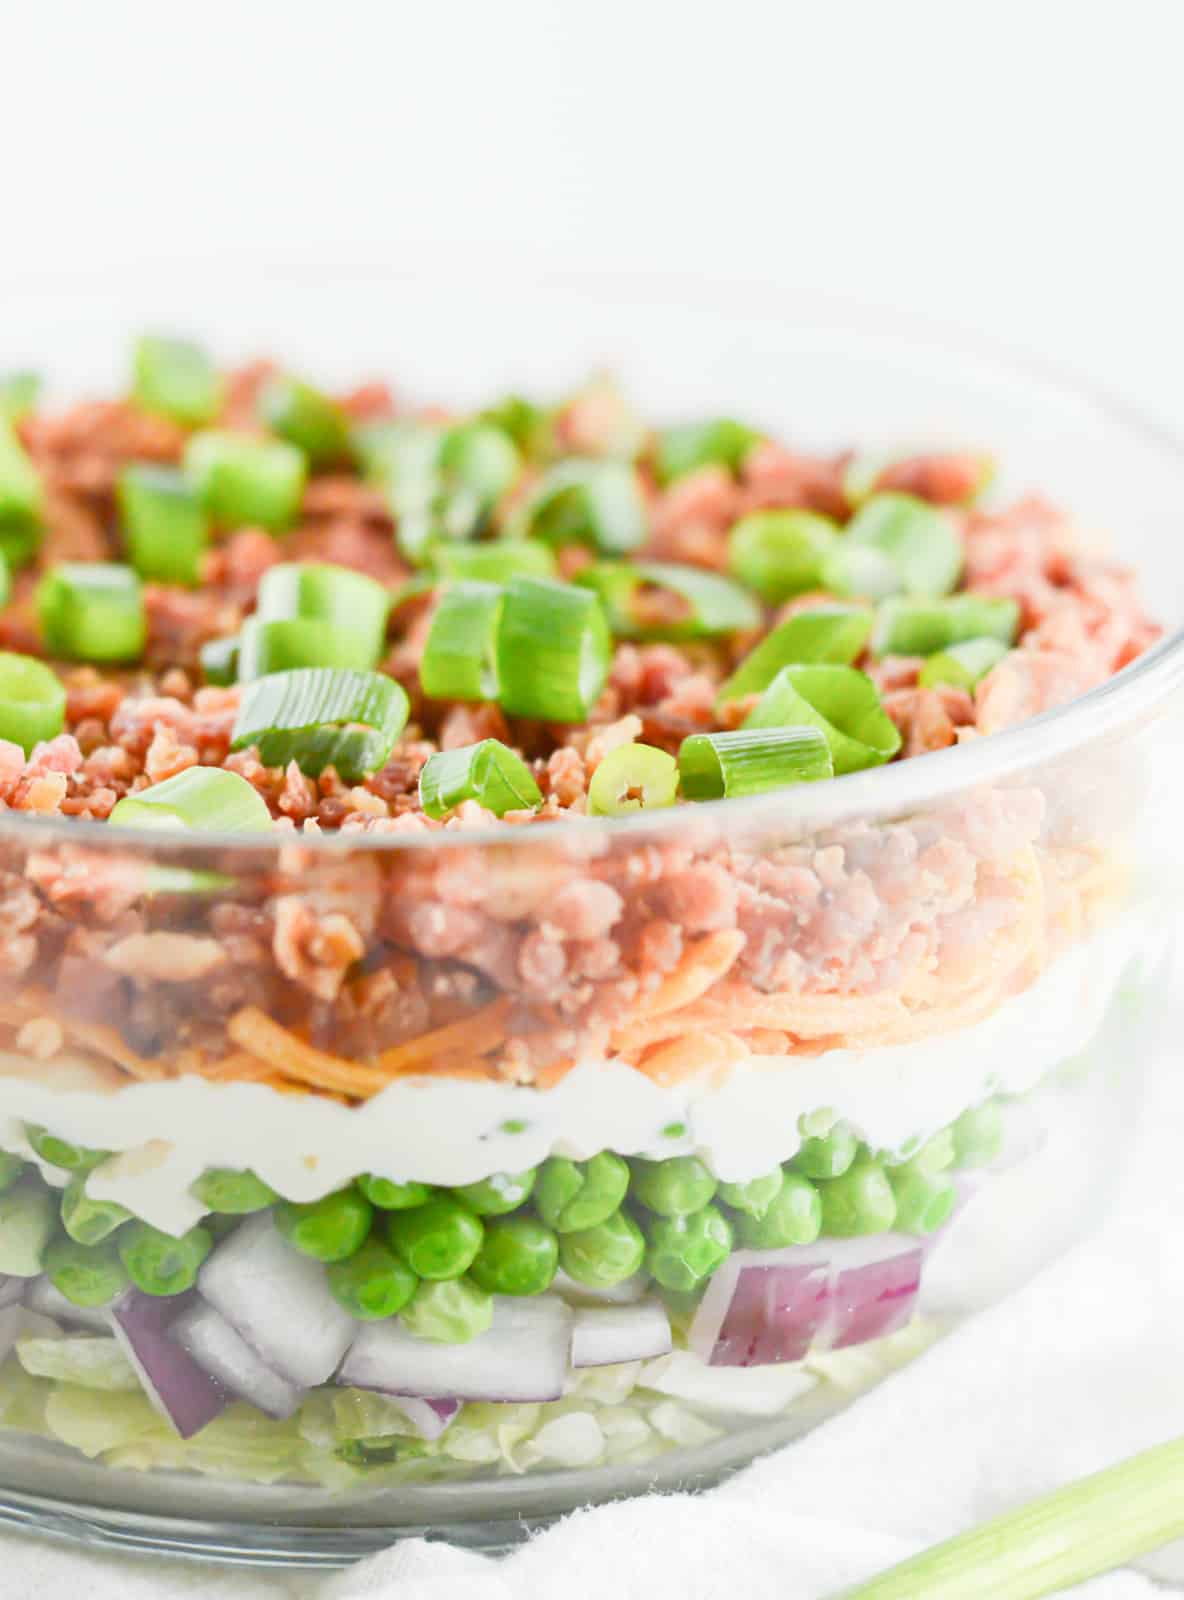 Layers of Seven Layer Salad in bowl